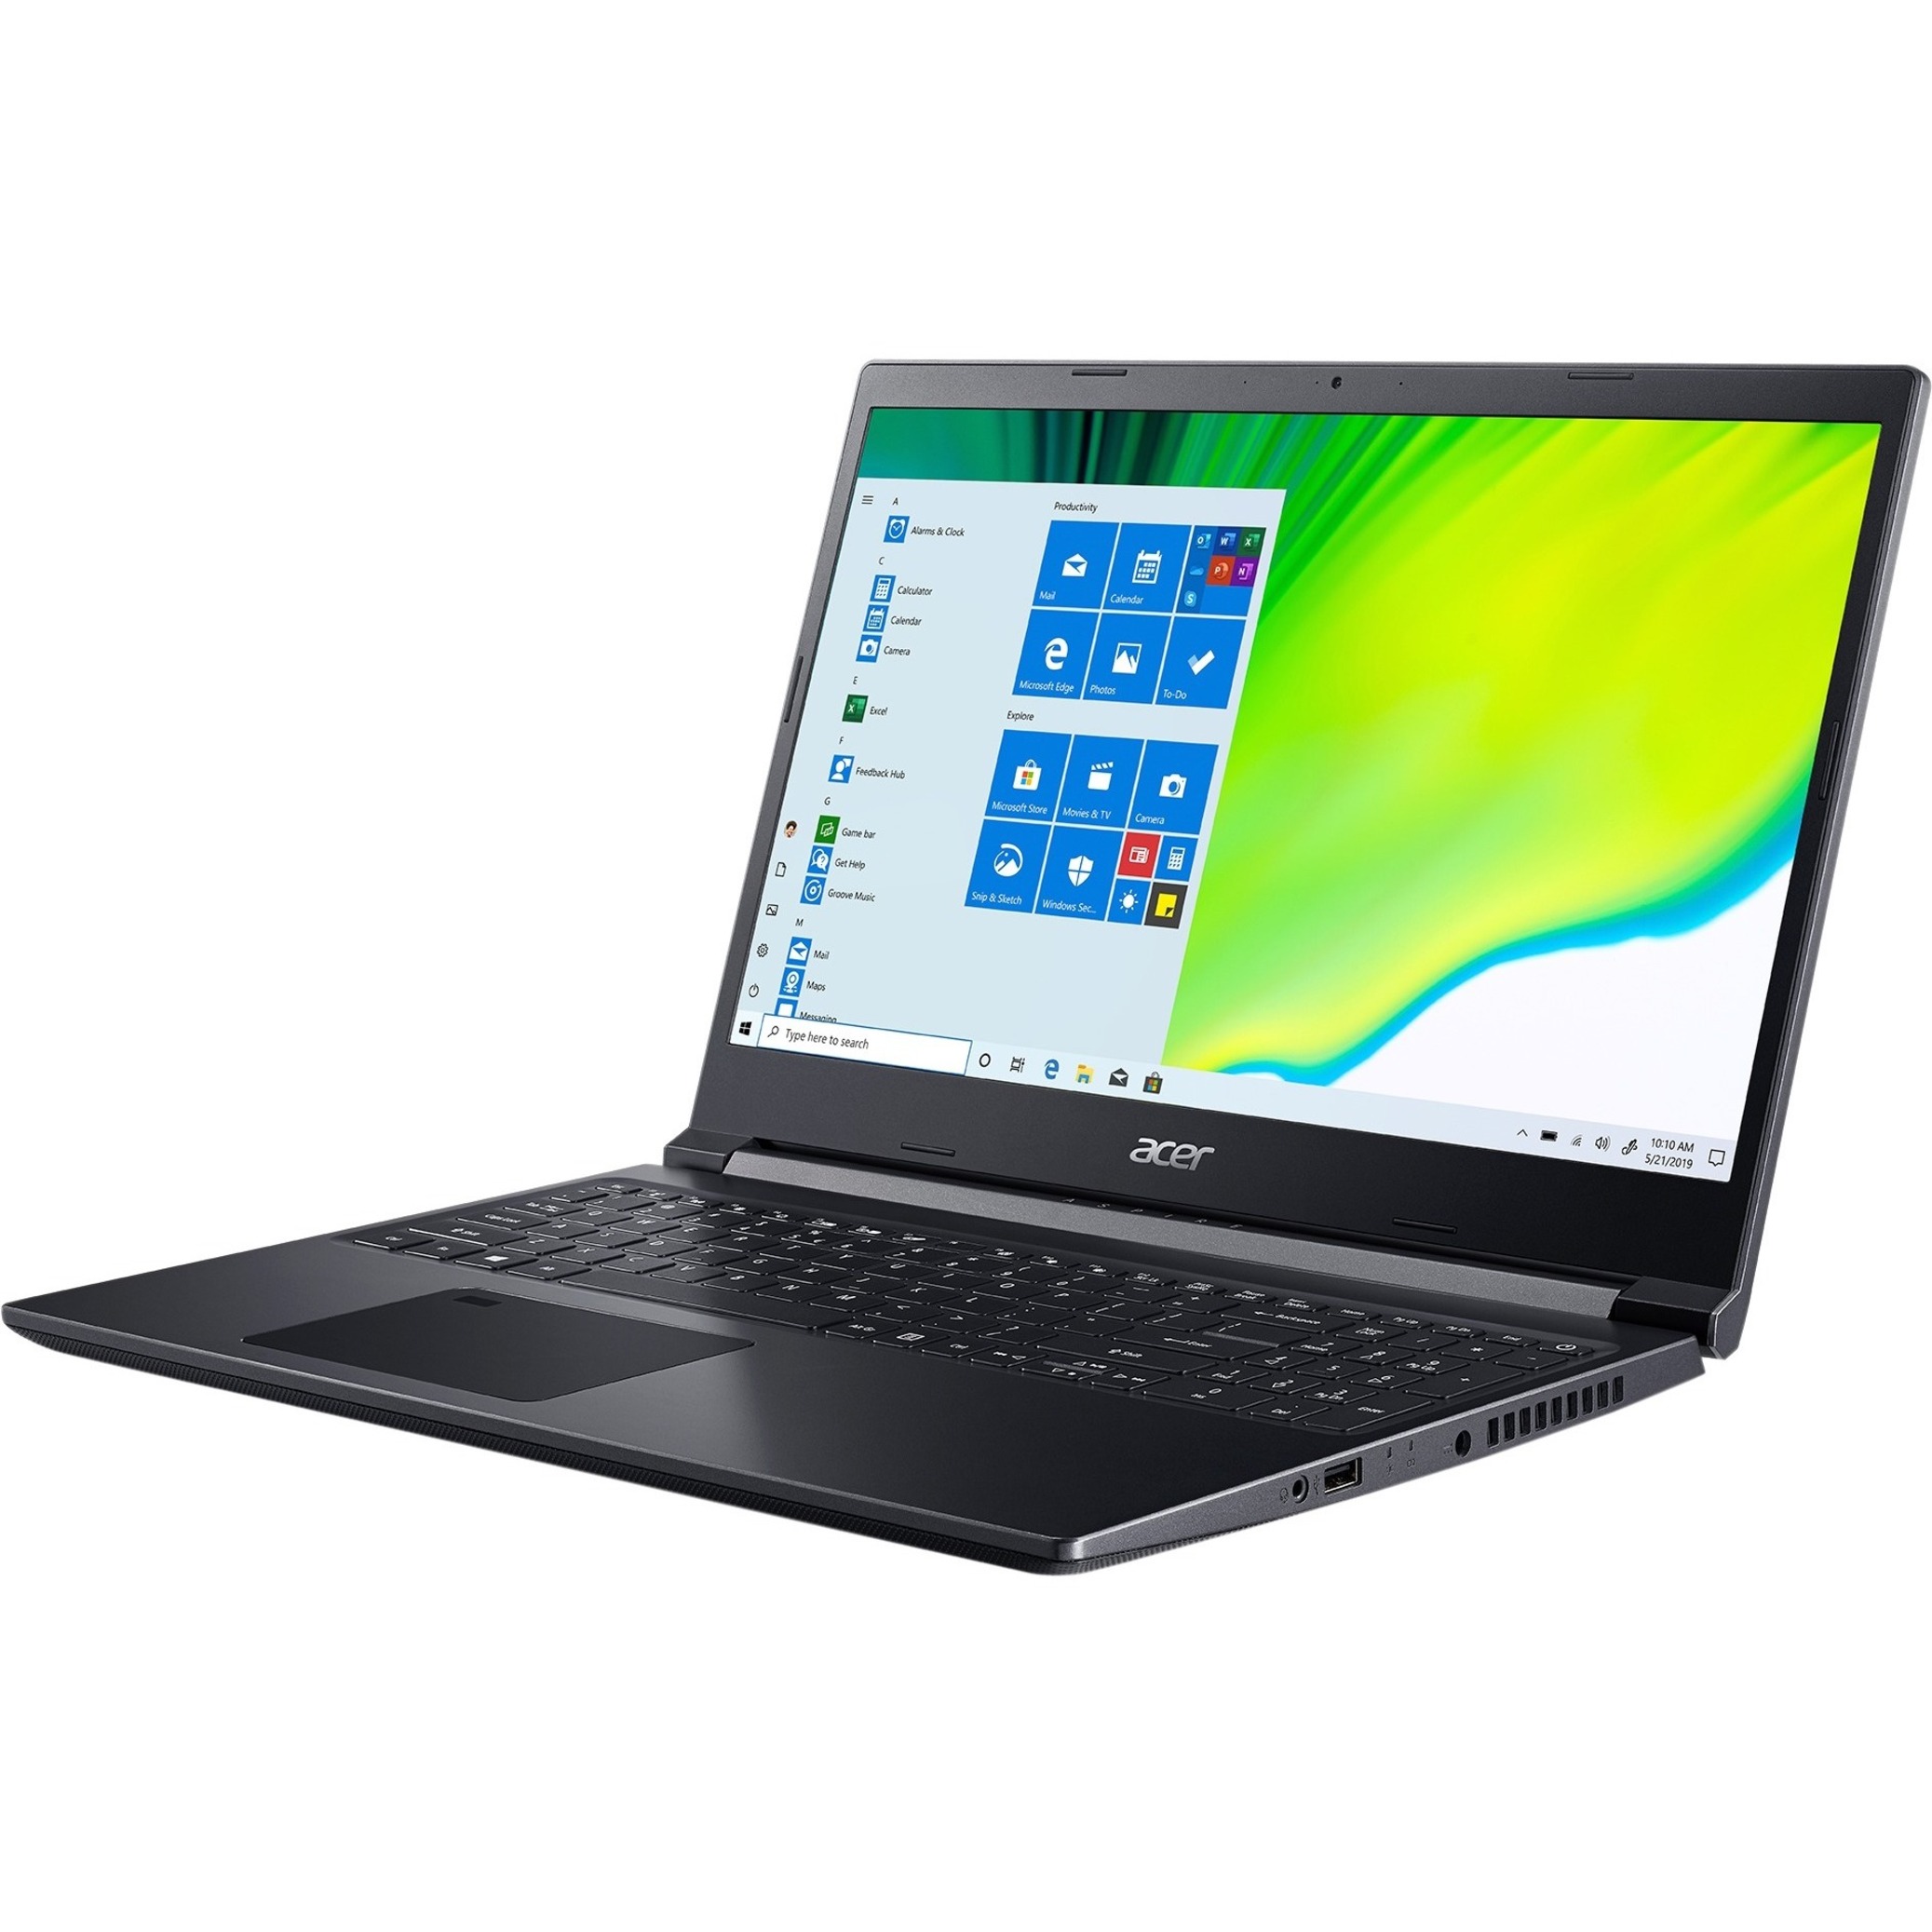 Acer Aspire 7 15.6" Full HD Laptop, Intel Core i5 i5-9300H, 512GB SSD, Windows 10 Home, A715-75G-544V - image 1 of 9